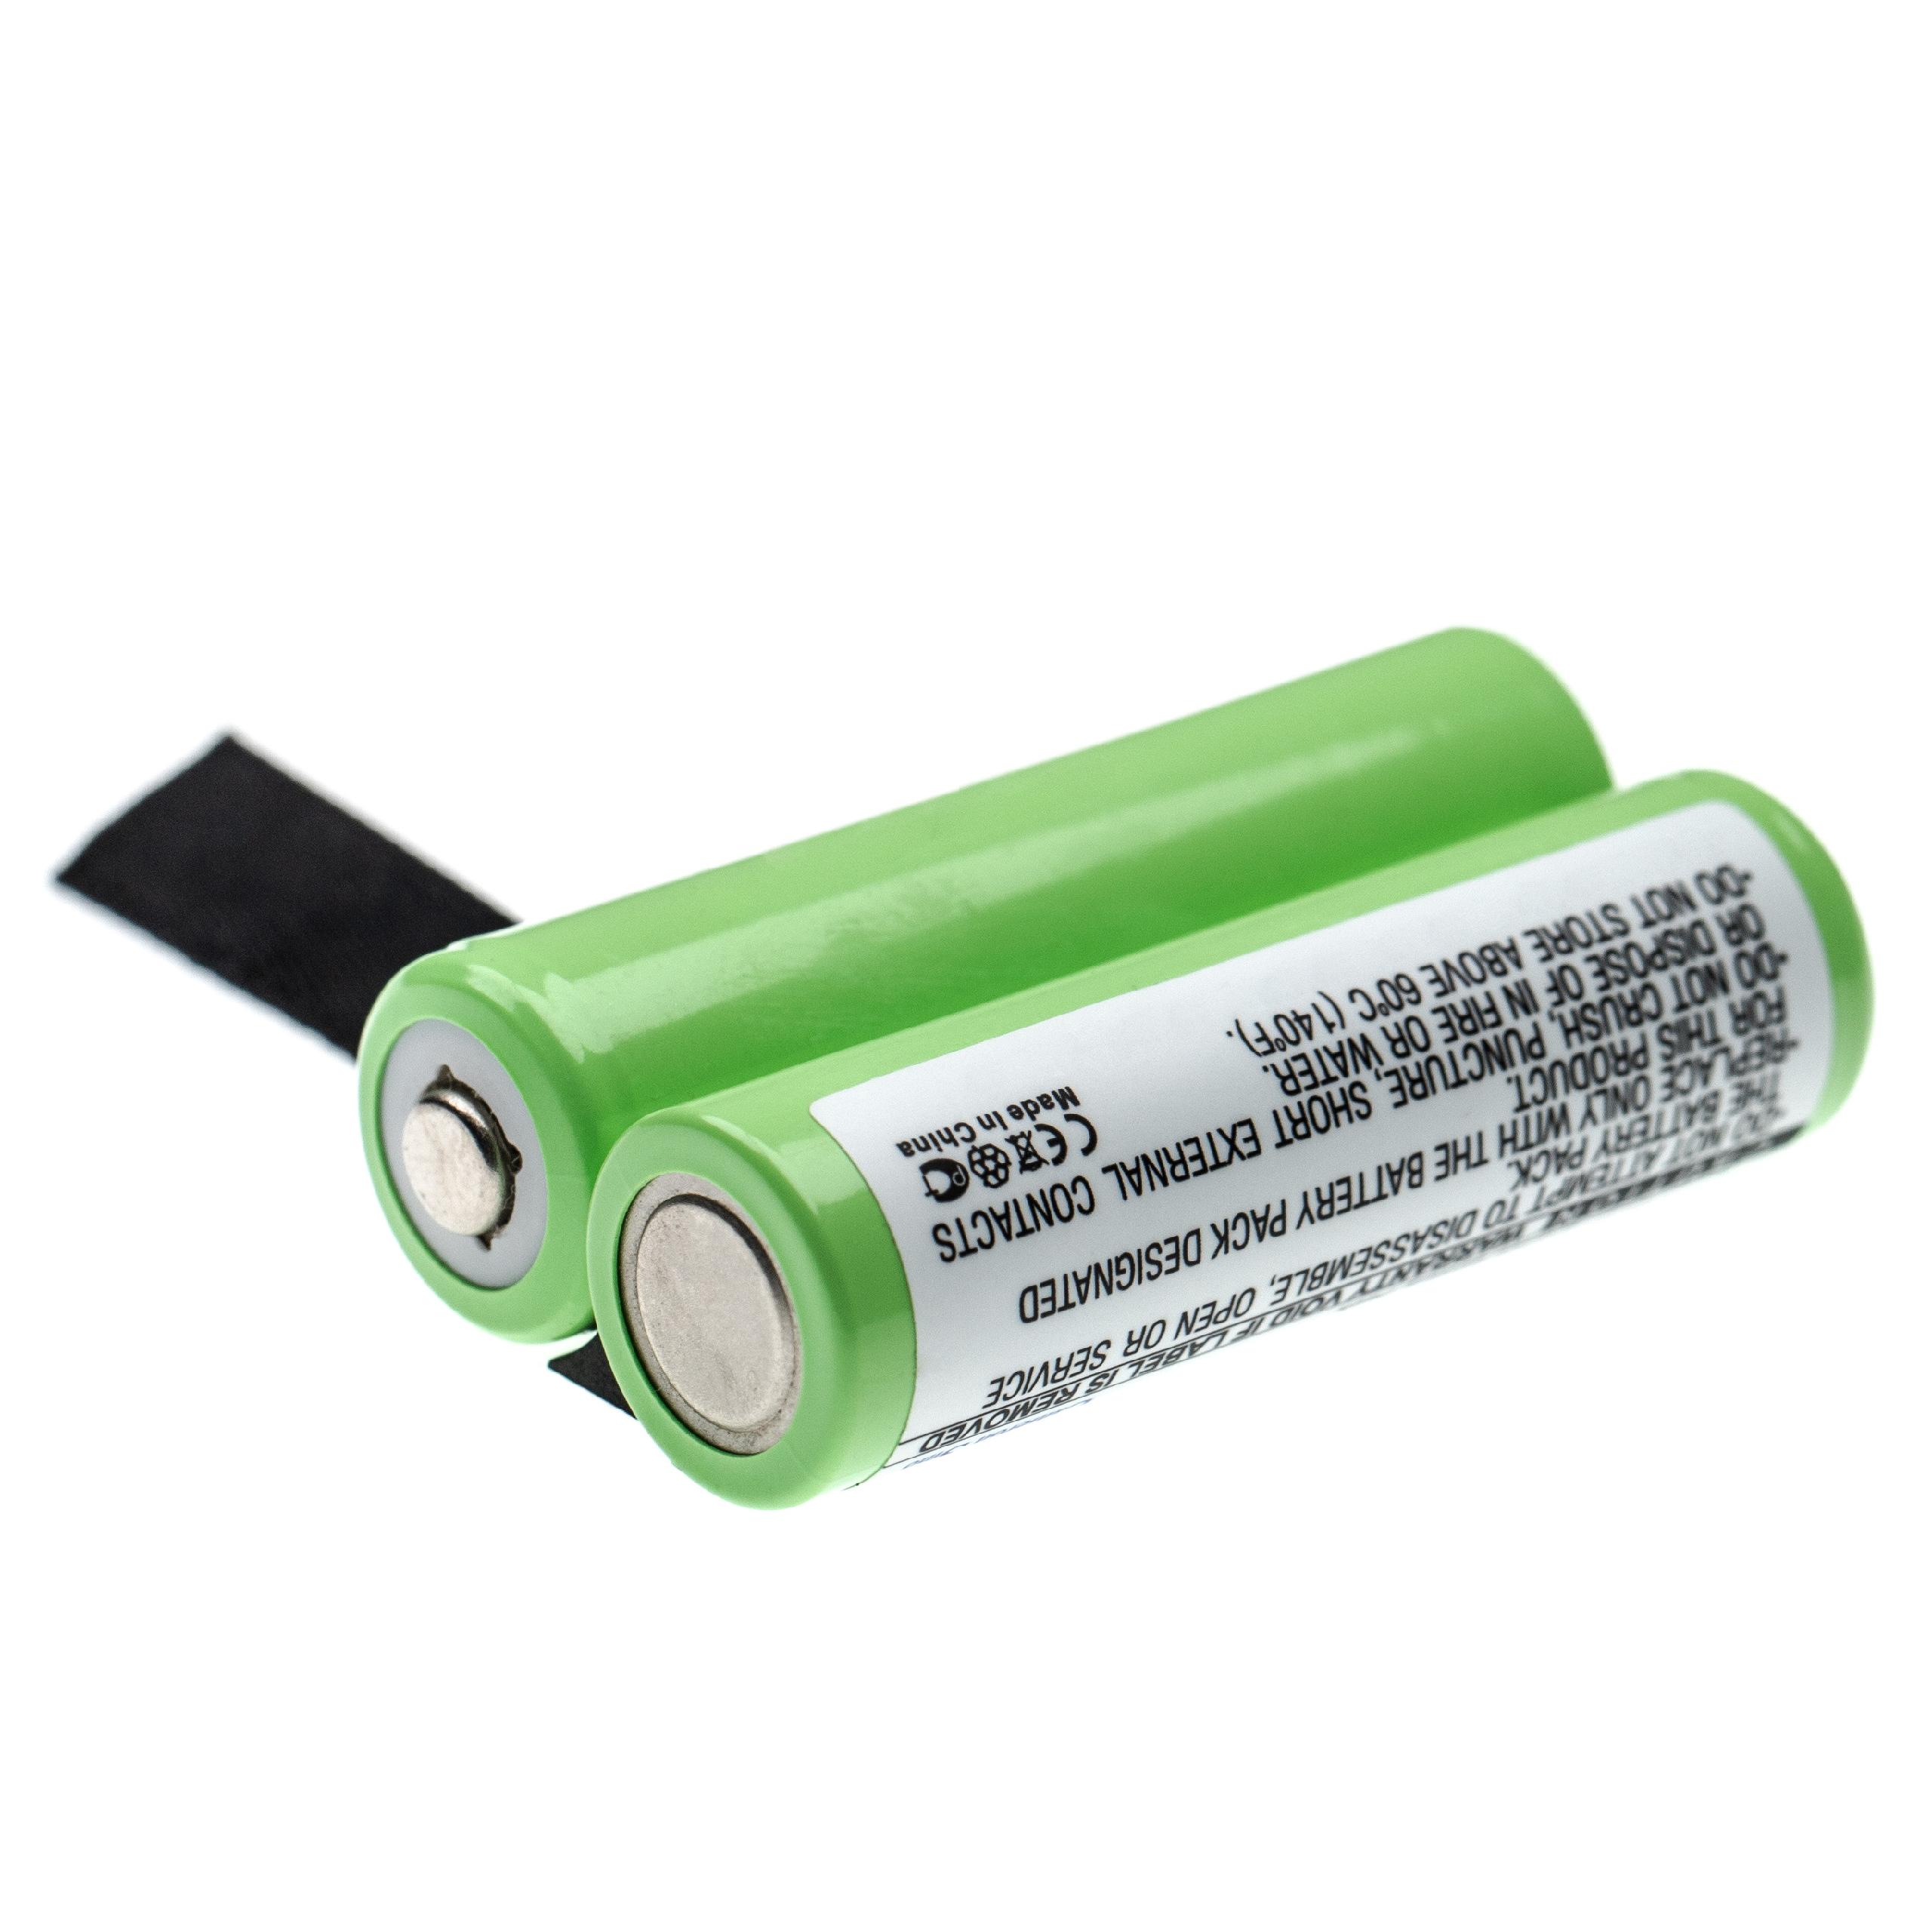 Industrial Remote Control Battery Replacement for Demag 773-499-44 - 2000mAh 2.4V NiMH